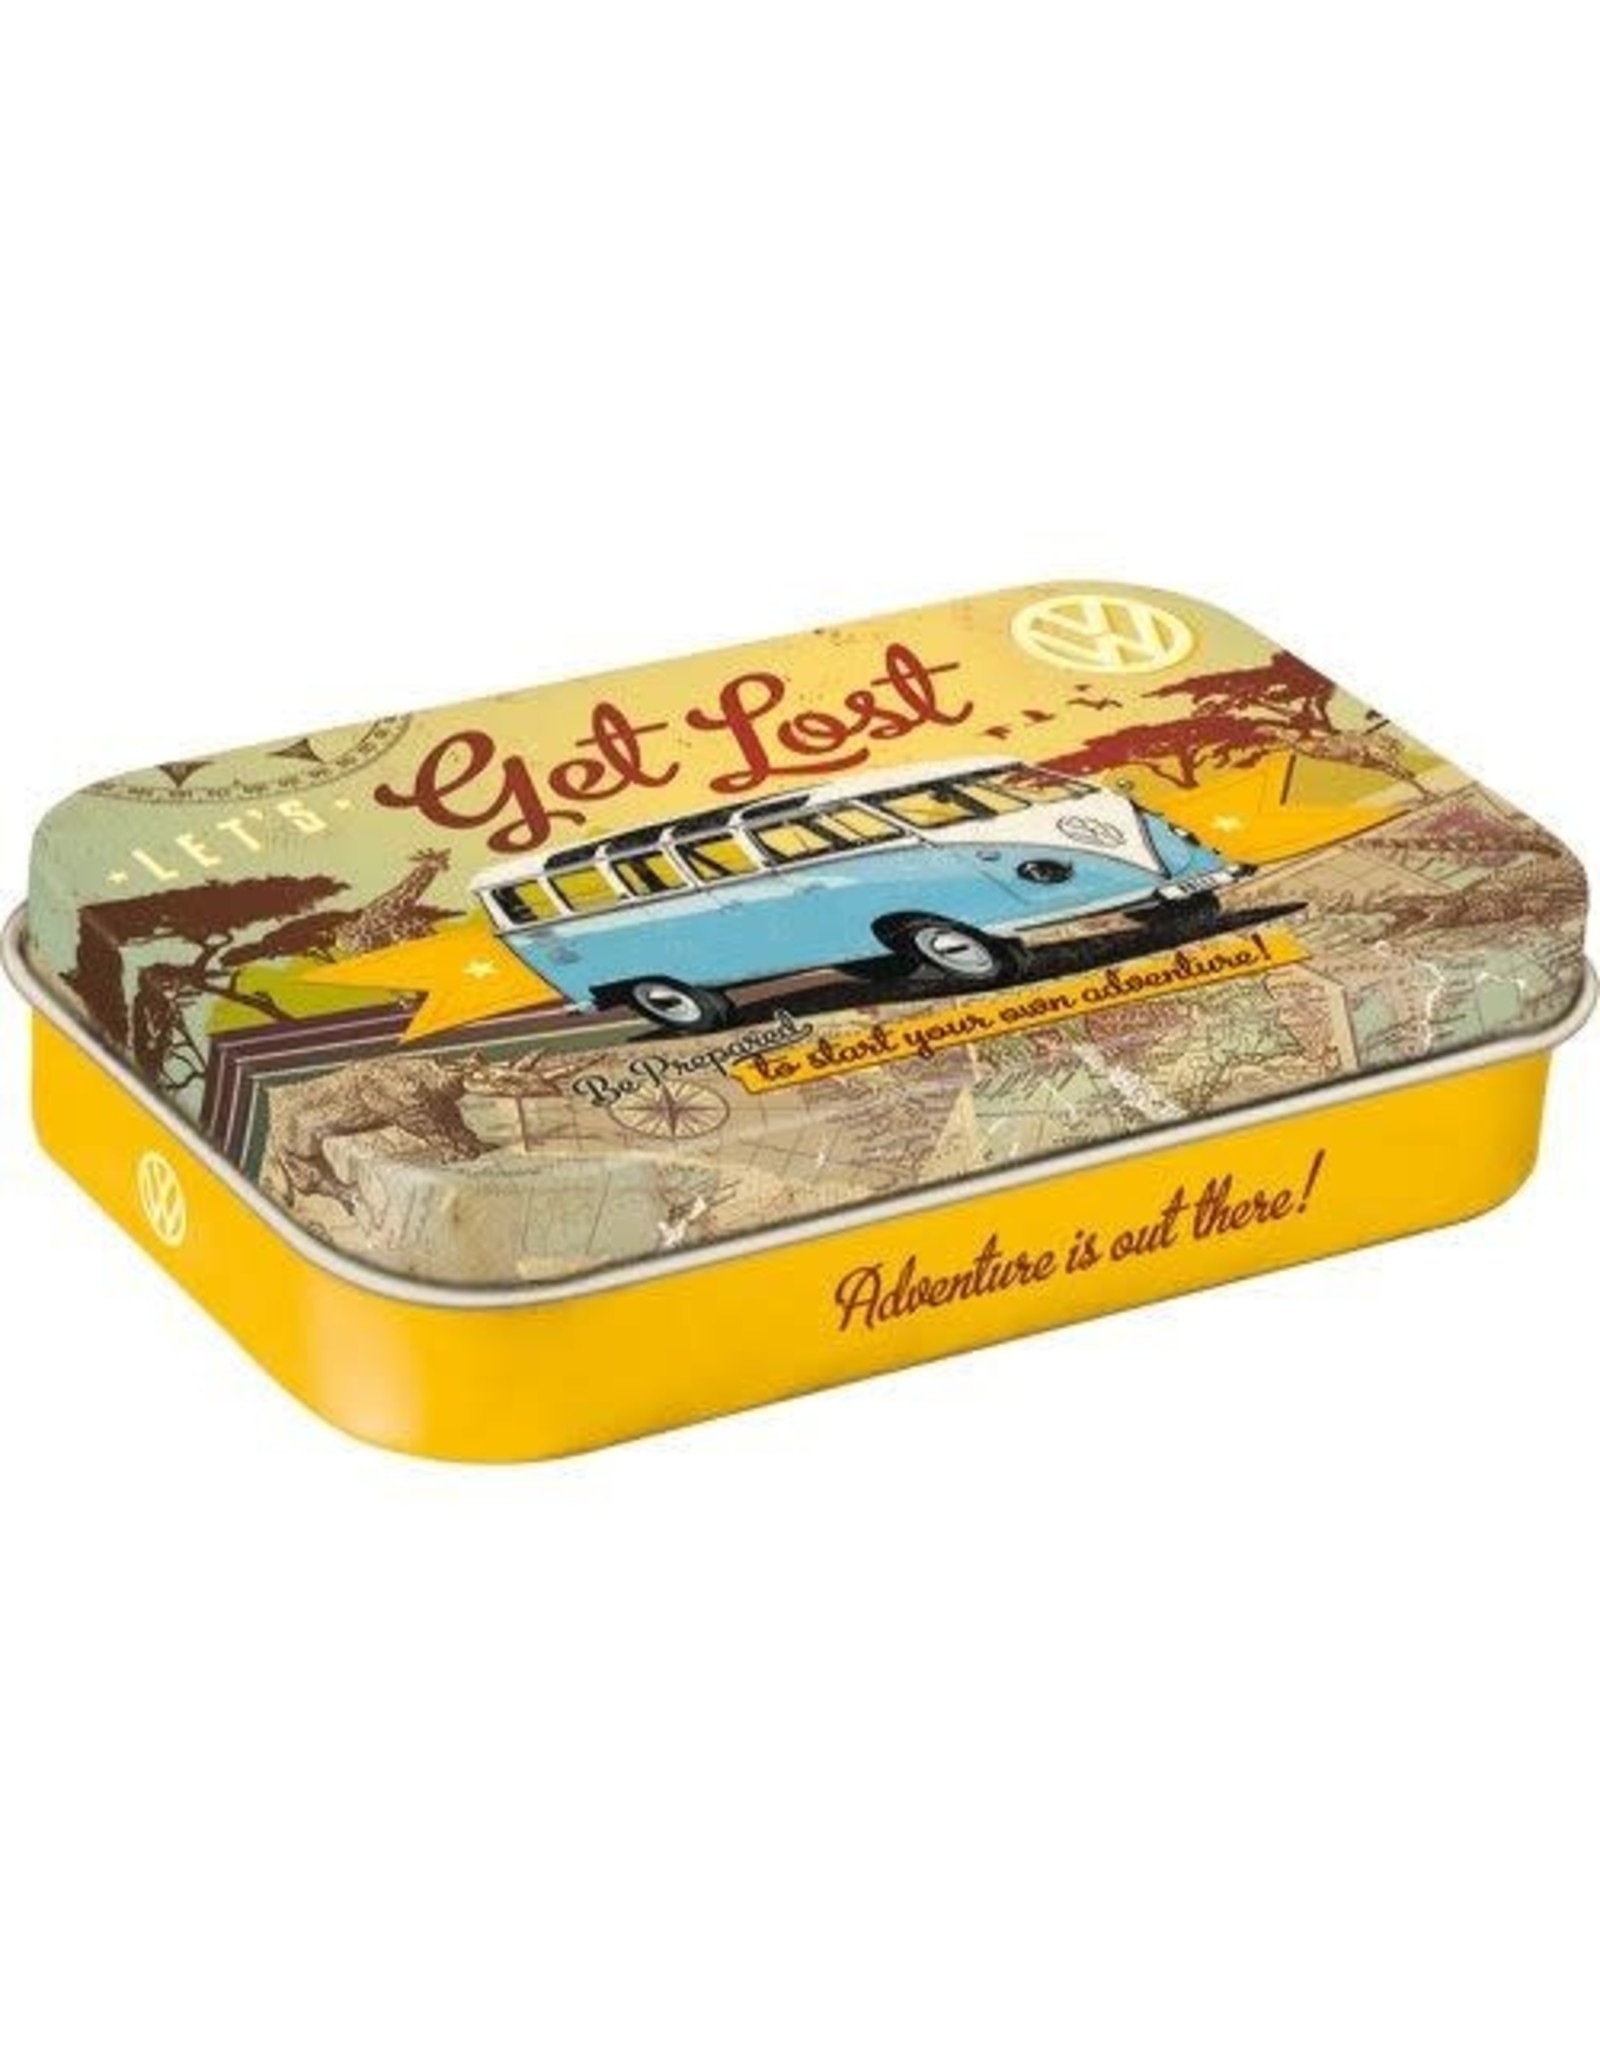 Jelly Jazz mint box - XL - let's get lost